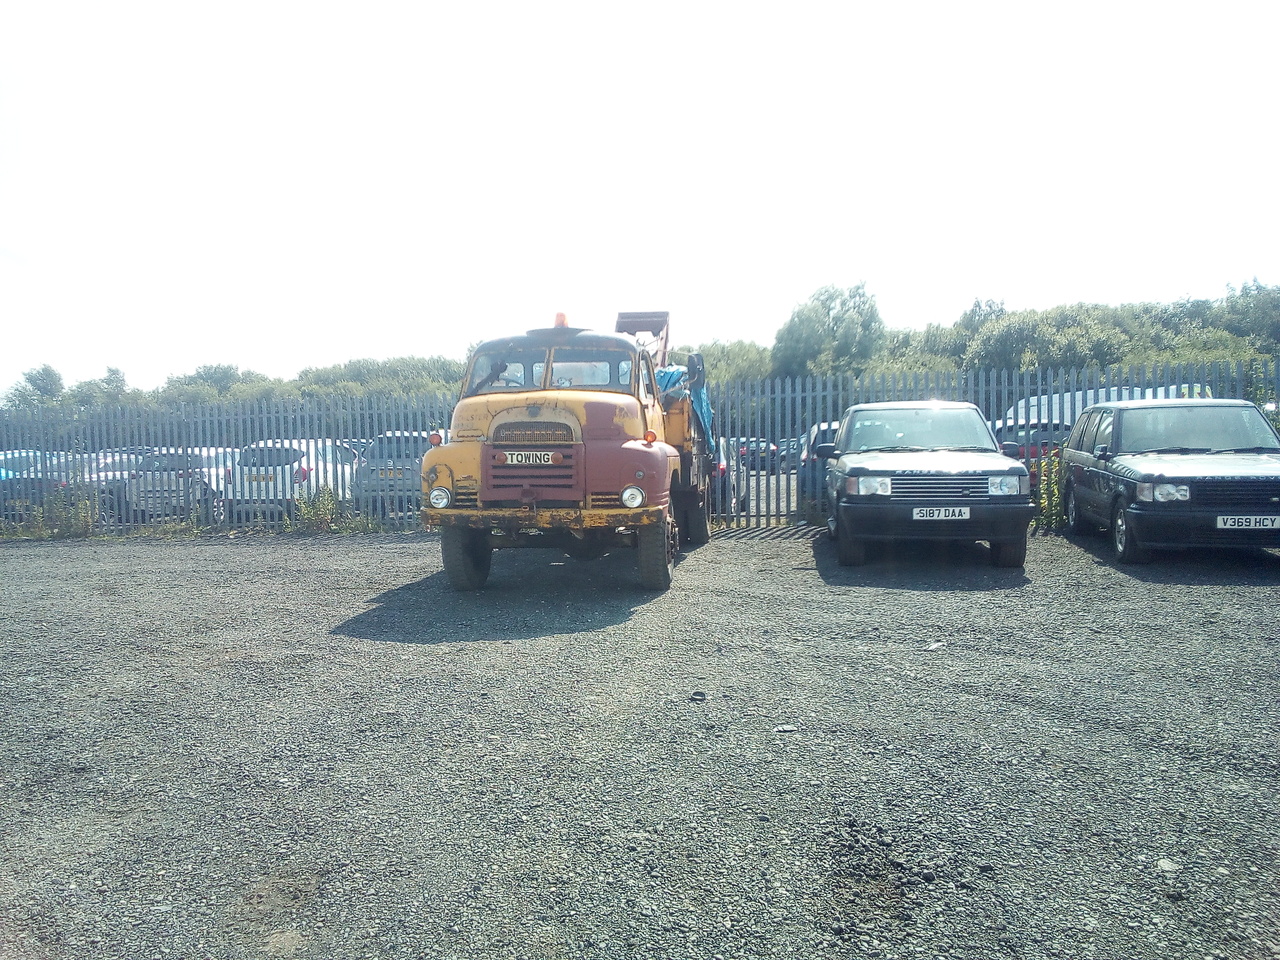 The truck, parked next to a pair of Range Rovers. It's only a
meter or so taller, to the top of the cab.